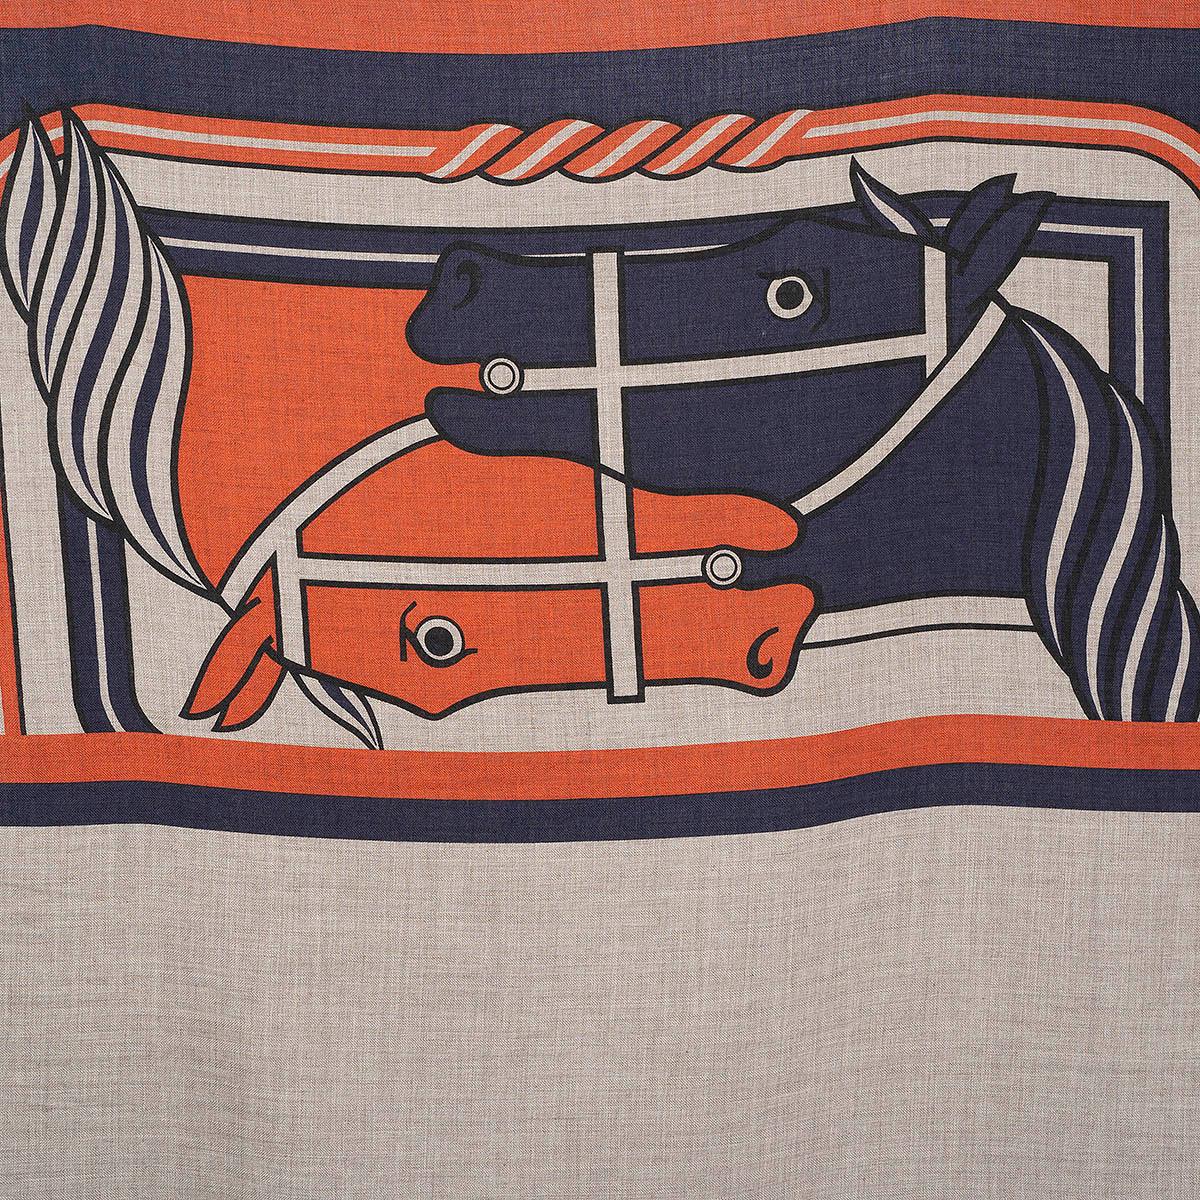 100% authentic Hermès Quadrige II shawl by Pierre Péron in taupe cashmere (70%) and silk (30%) with navy blue and rust details. Finished with hand-rolled and fringed edges. Brand new.

Measurements
Width	90cm (35.1in)
Length	180cm (70.2in)

All our